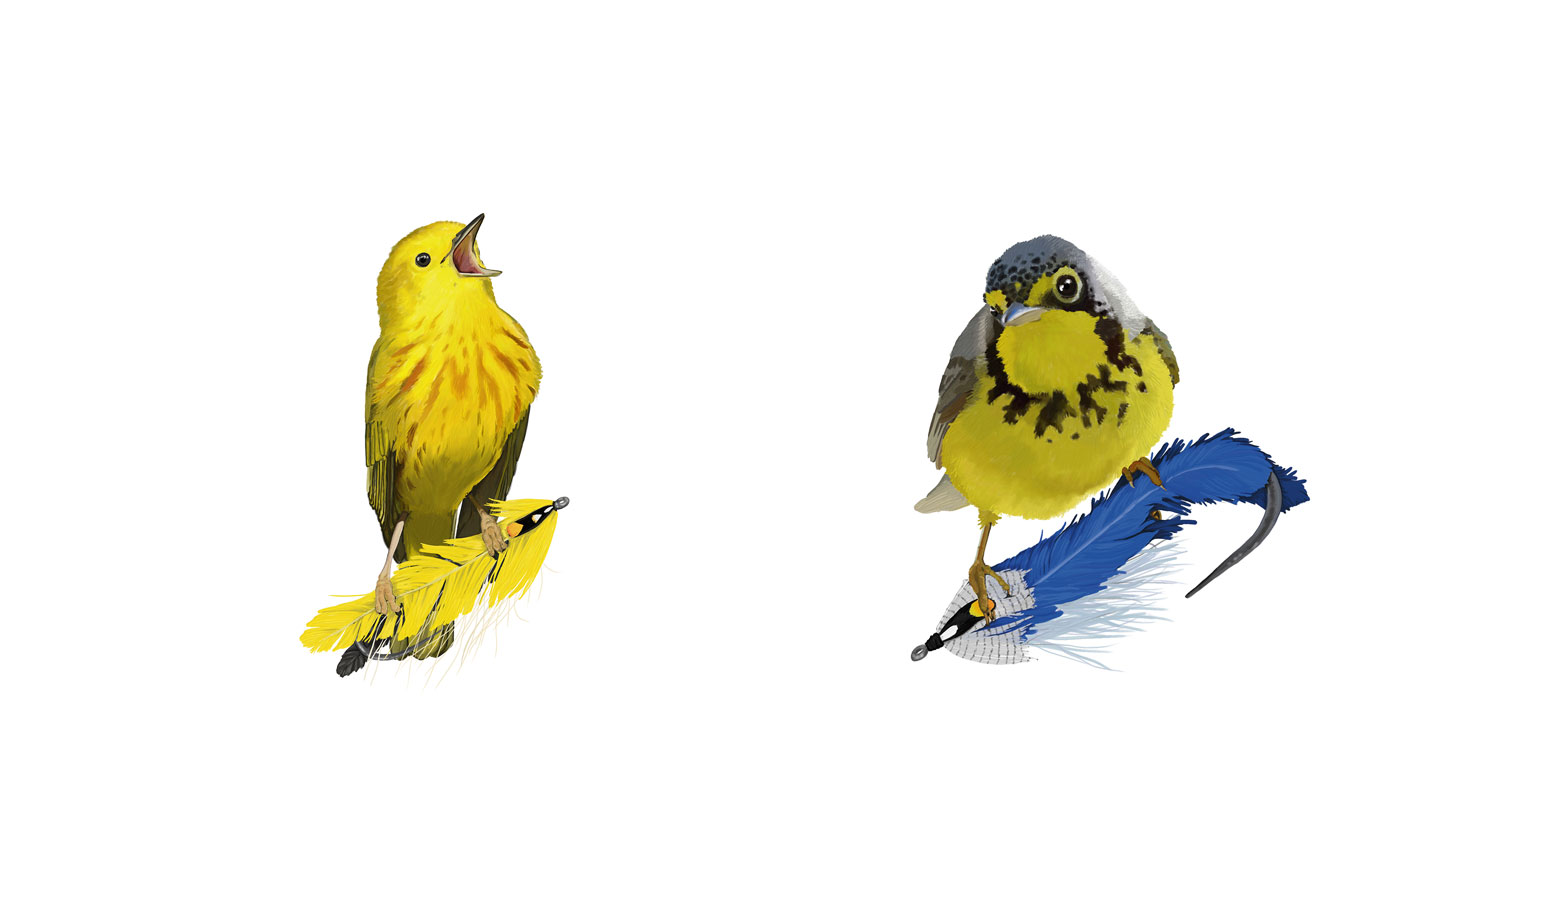 Canada Warbler and Yellow Warbler